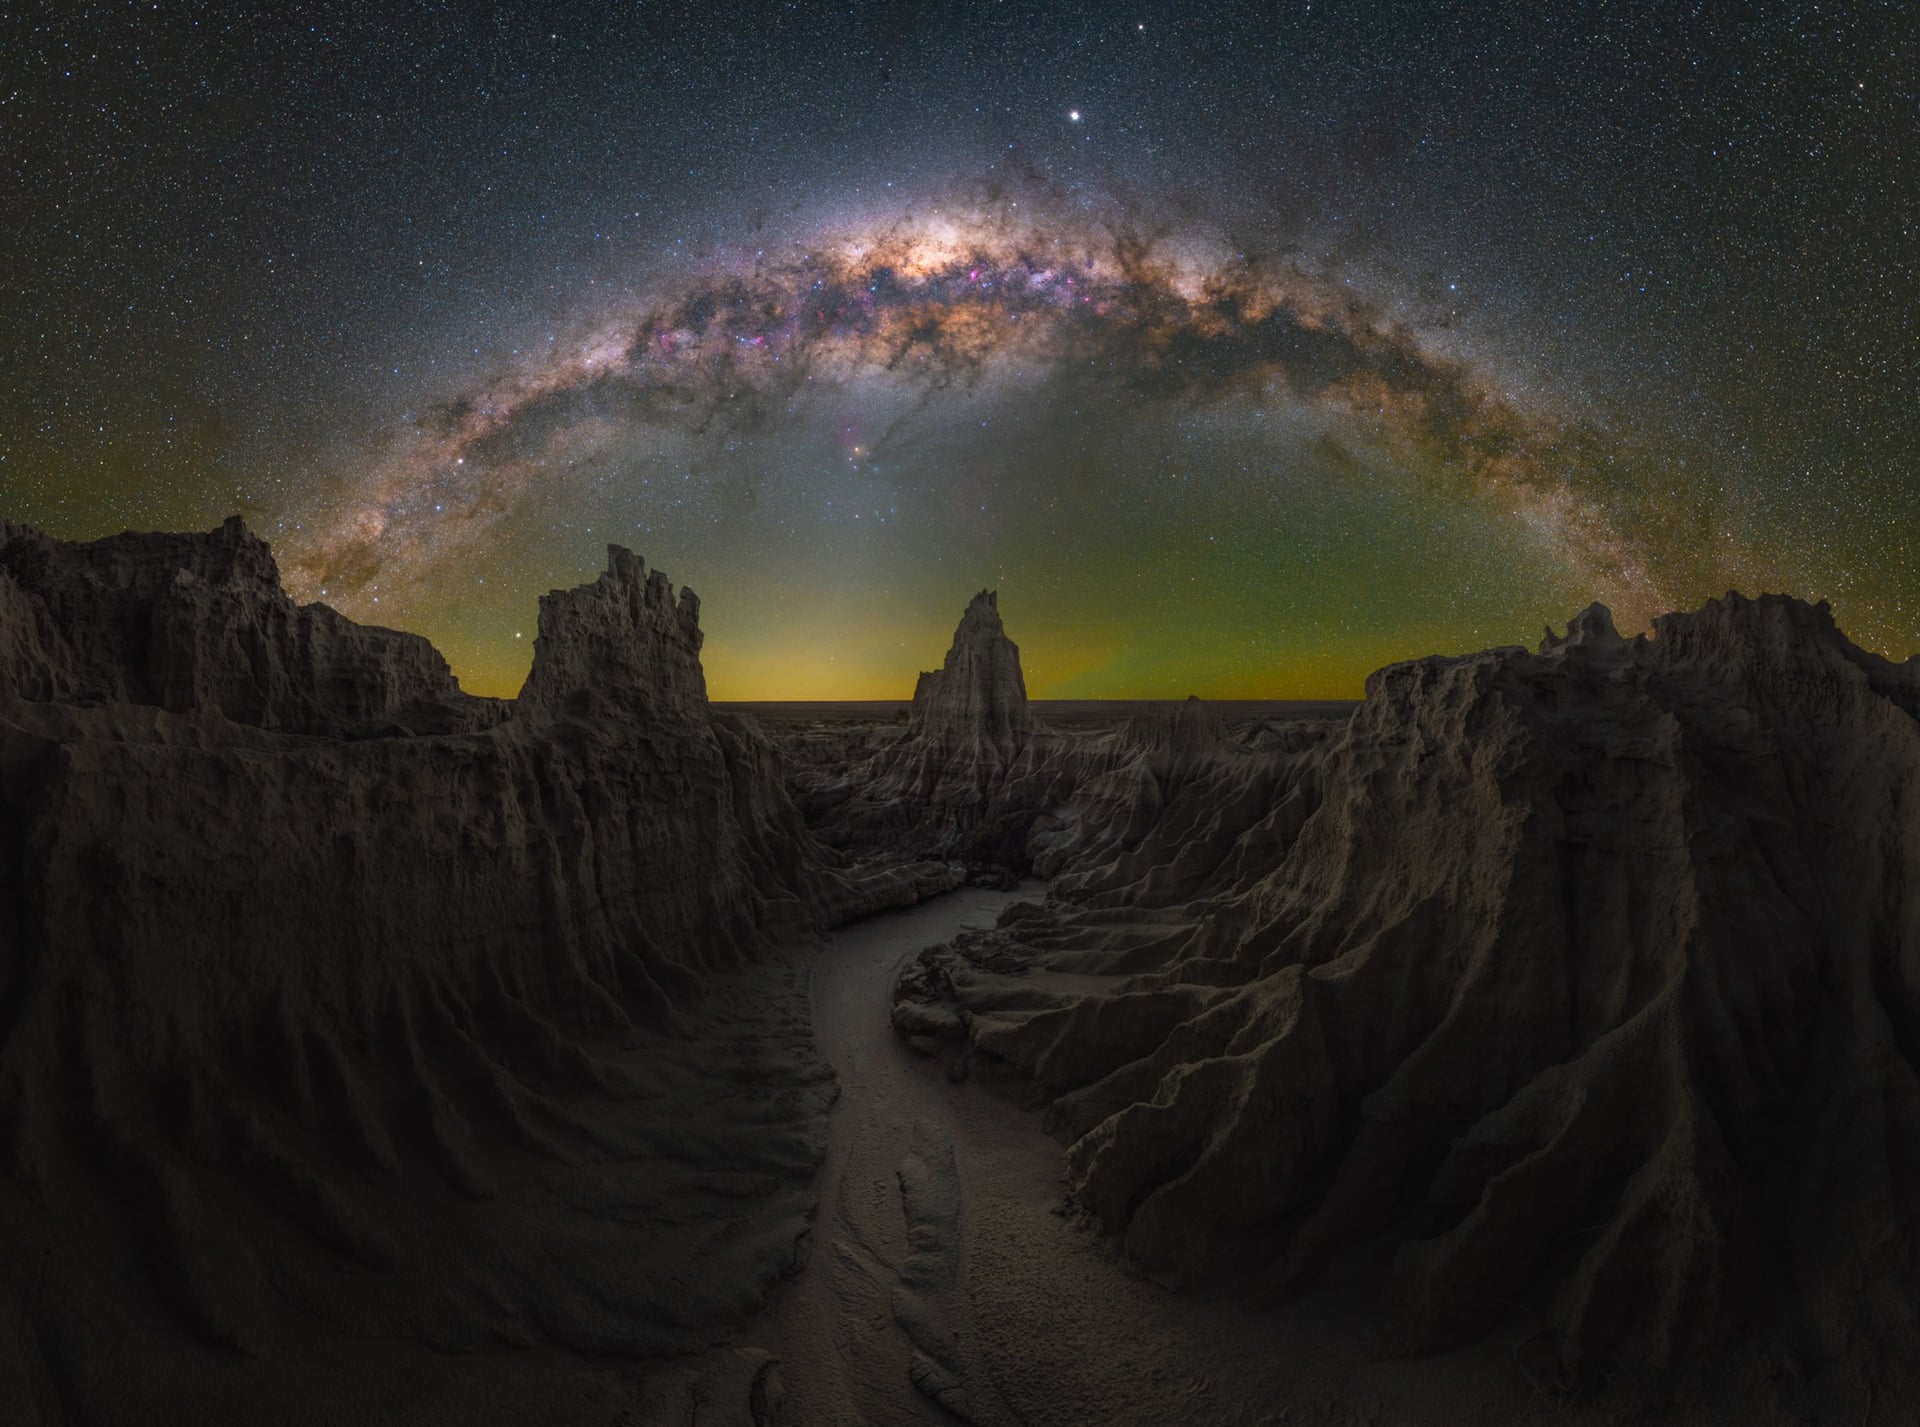 Milky Way photographer of the year